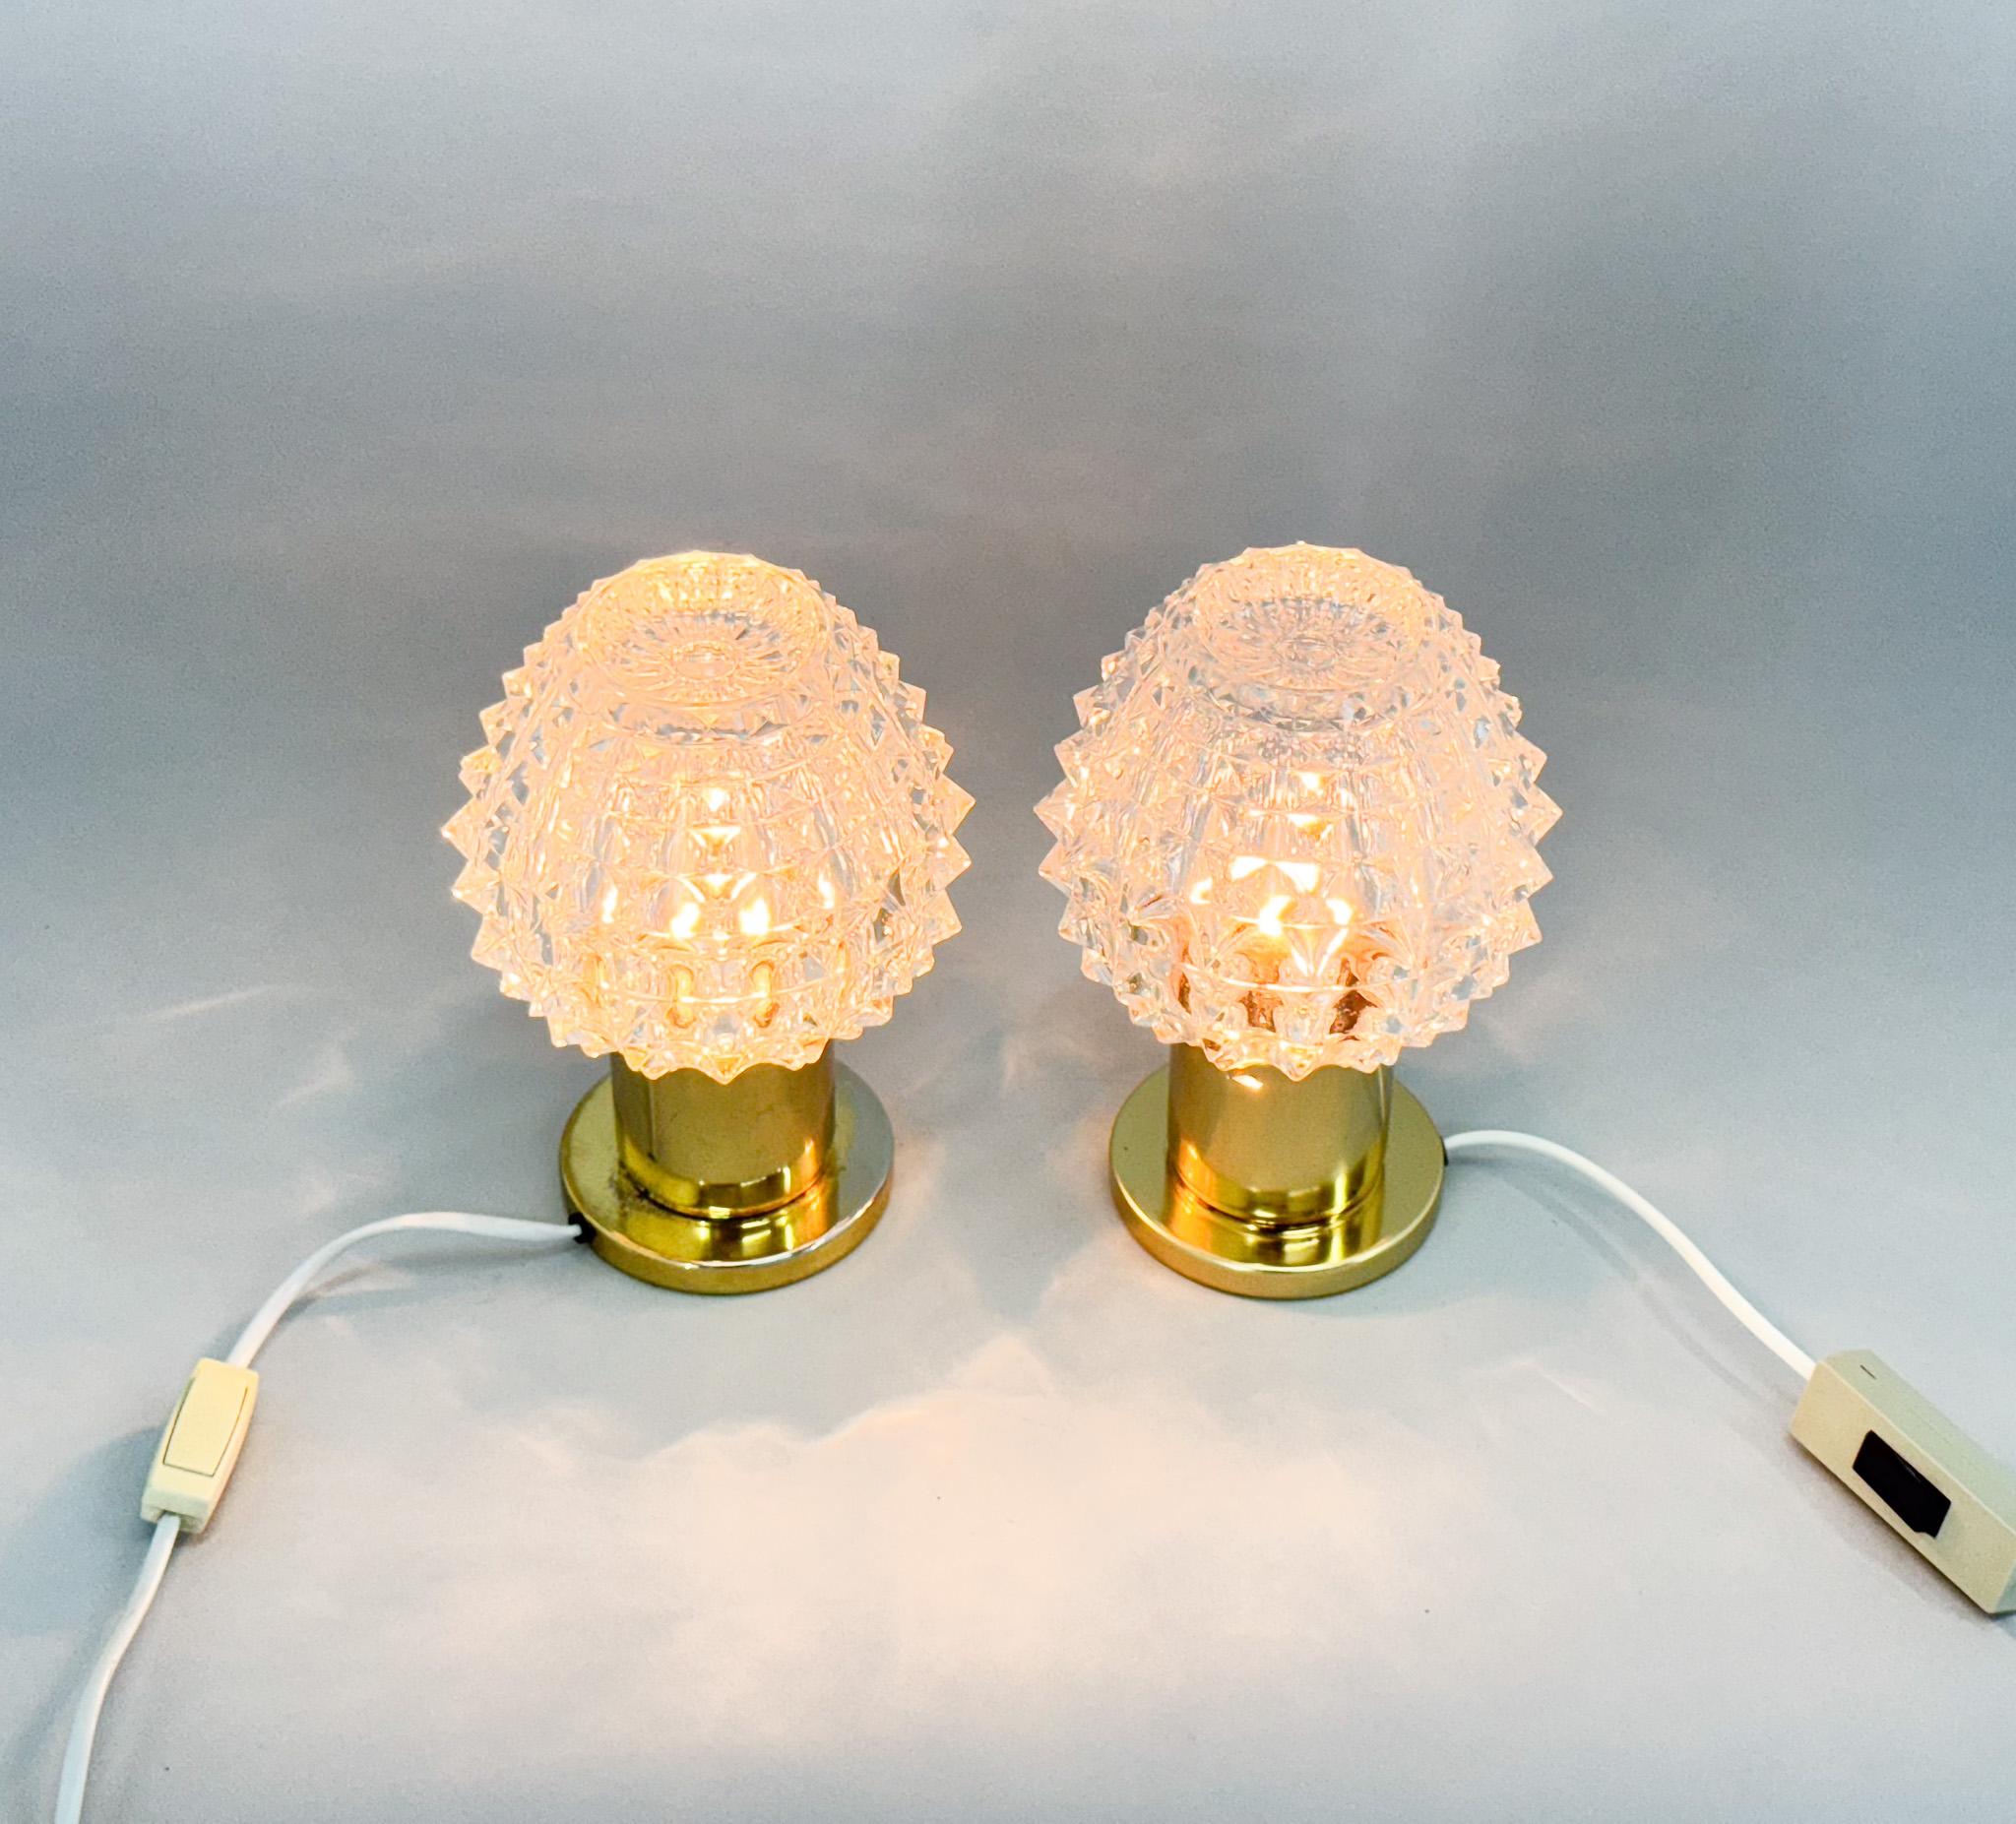 Pair of Brass and Glass Table Lamps by Kamenicky Senov, 1970s For Sale 4